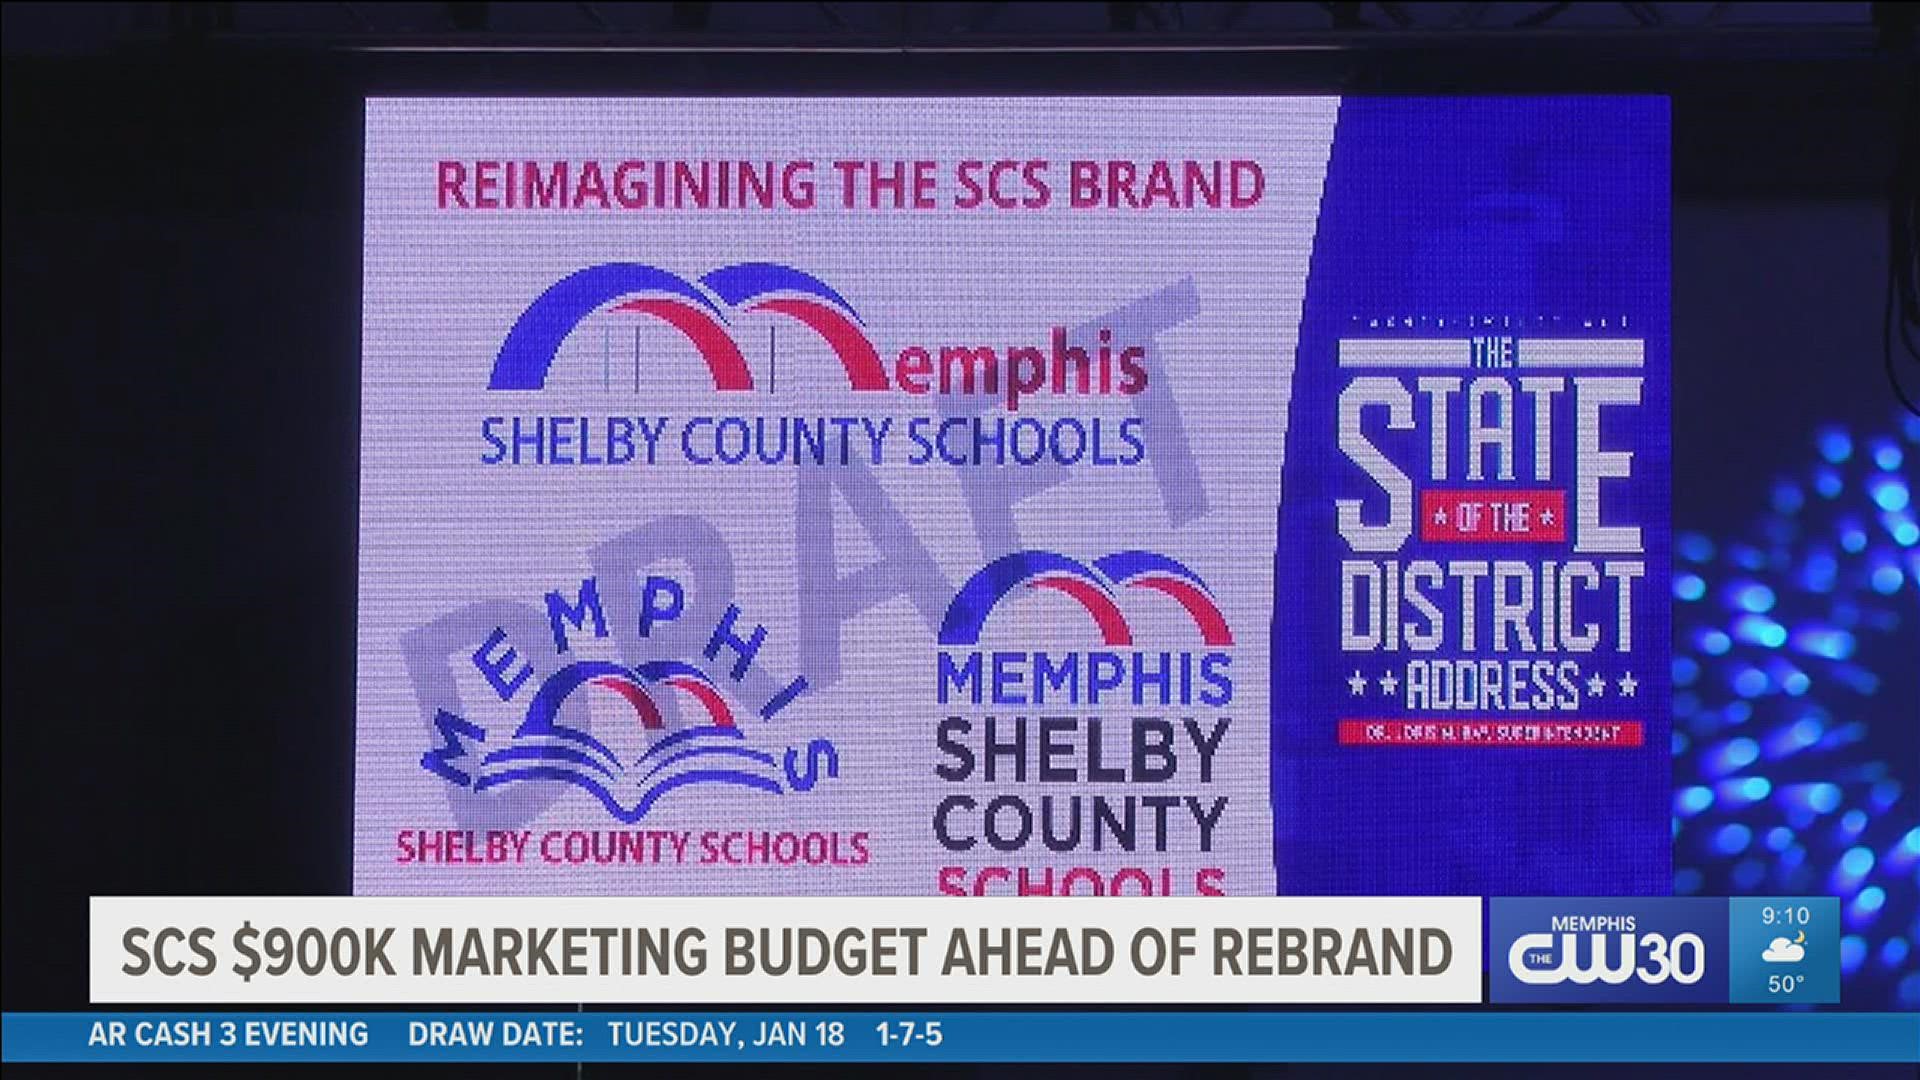 The district is planning to change its name to Memphis-Shelby County Schools, and many parents have raised concerns about the timing of the rebranding.